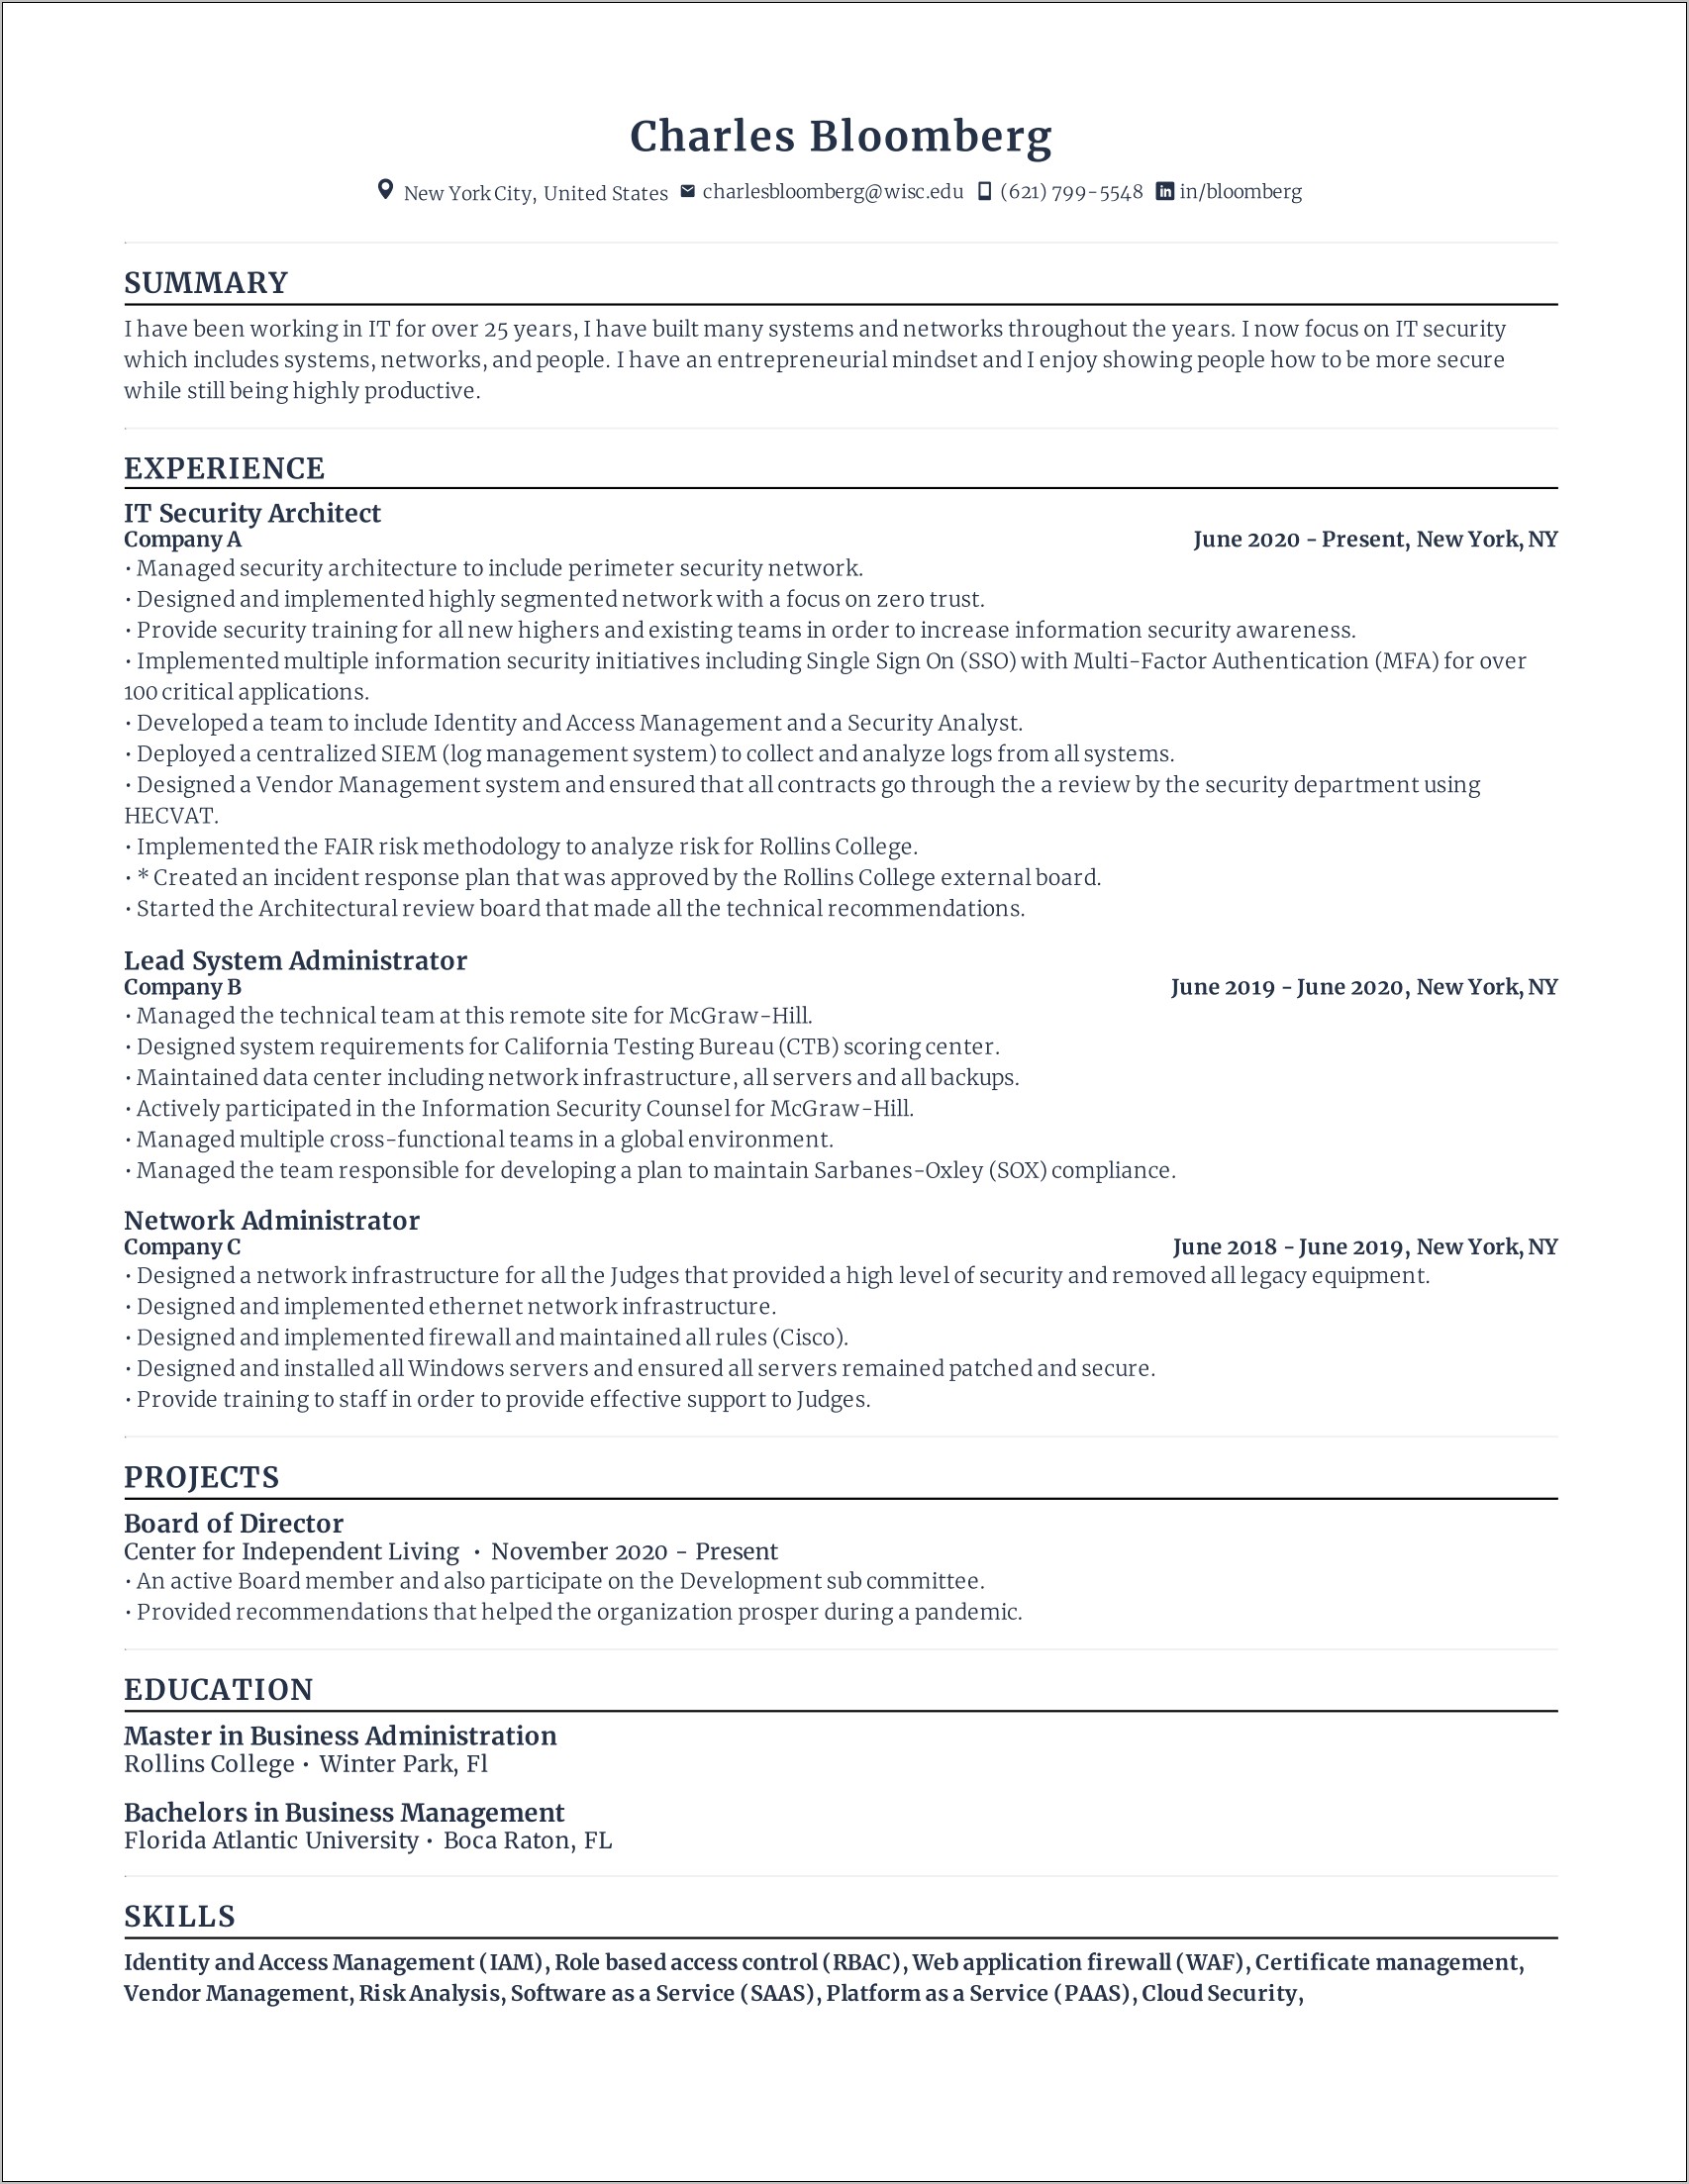 Resume Summary For Technical Support Professional